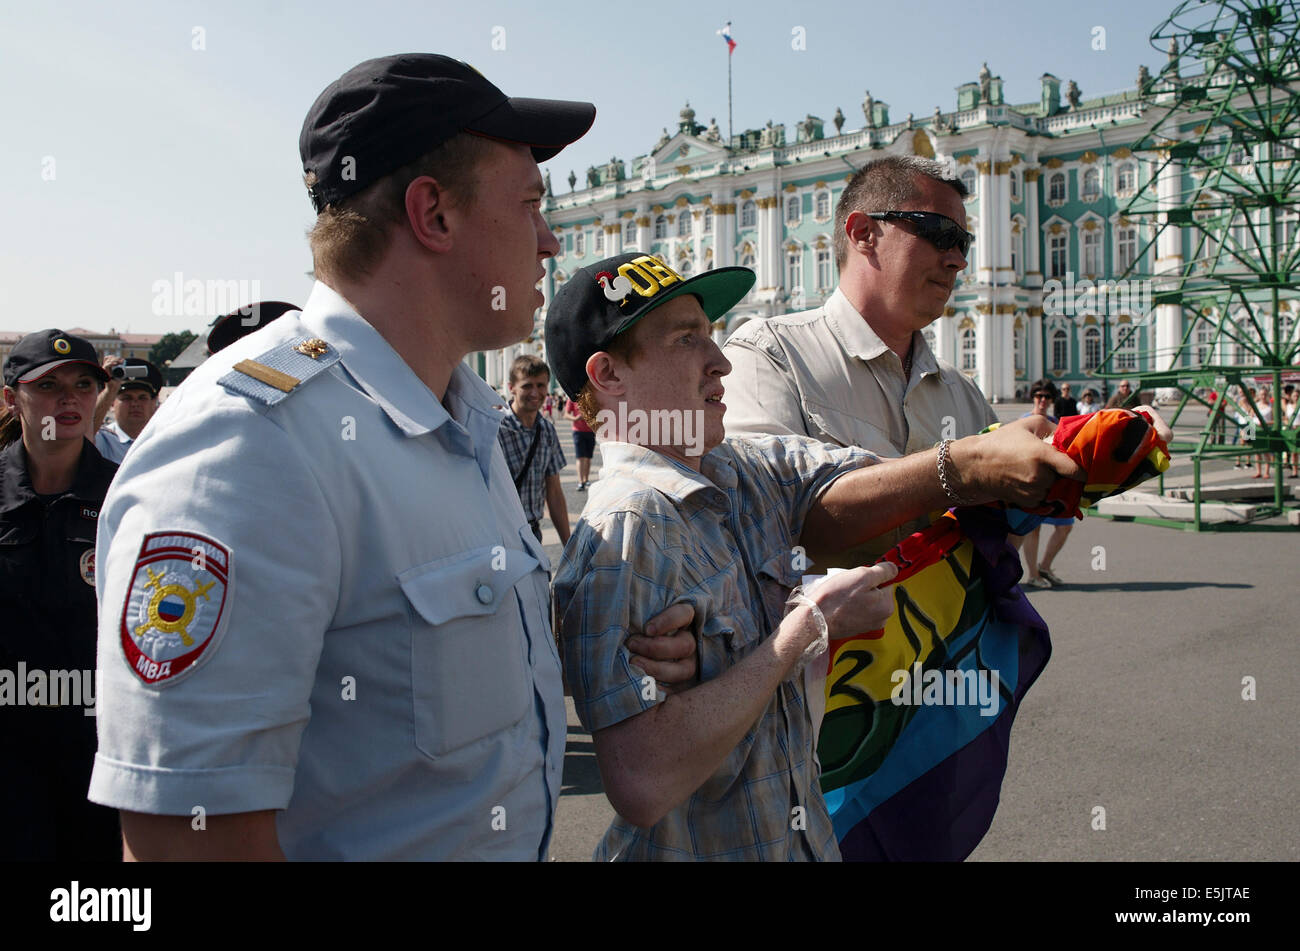 St Petersburg, Russia. 2nd Aug, 2014. LGBT gay activist KIRILL KALUGIN is arrested by police during a one-man protest in Palace Square. Credit:  Denis Tarasov/ZUMA Wire/ZUMAPRESS.com/Alamy Live News Stock Photo